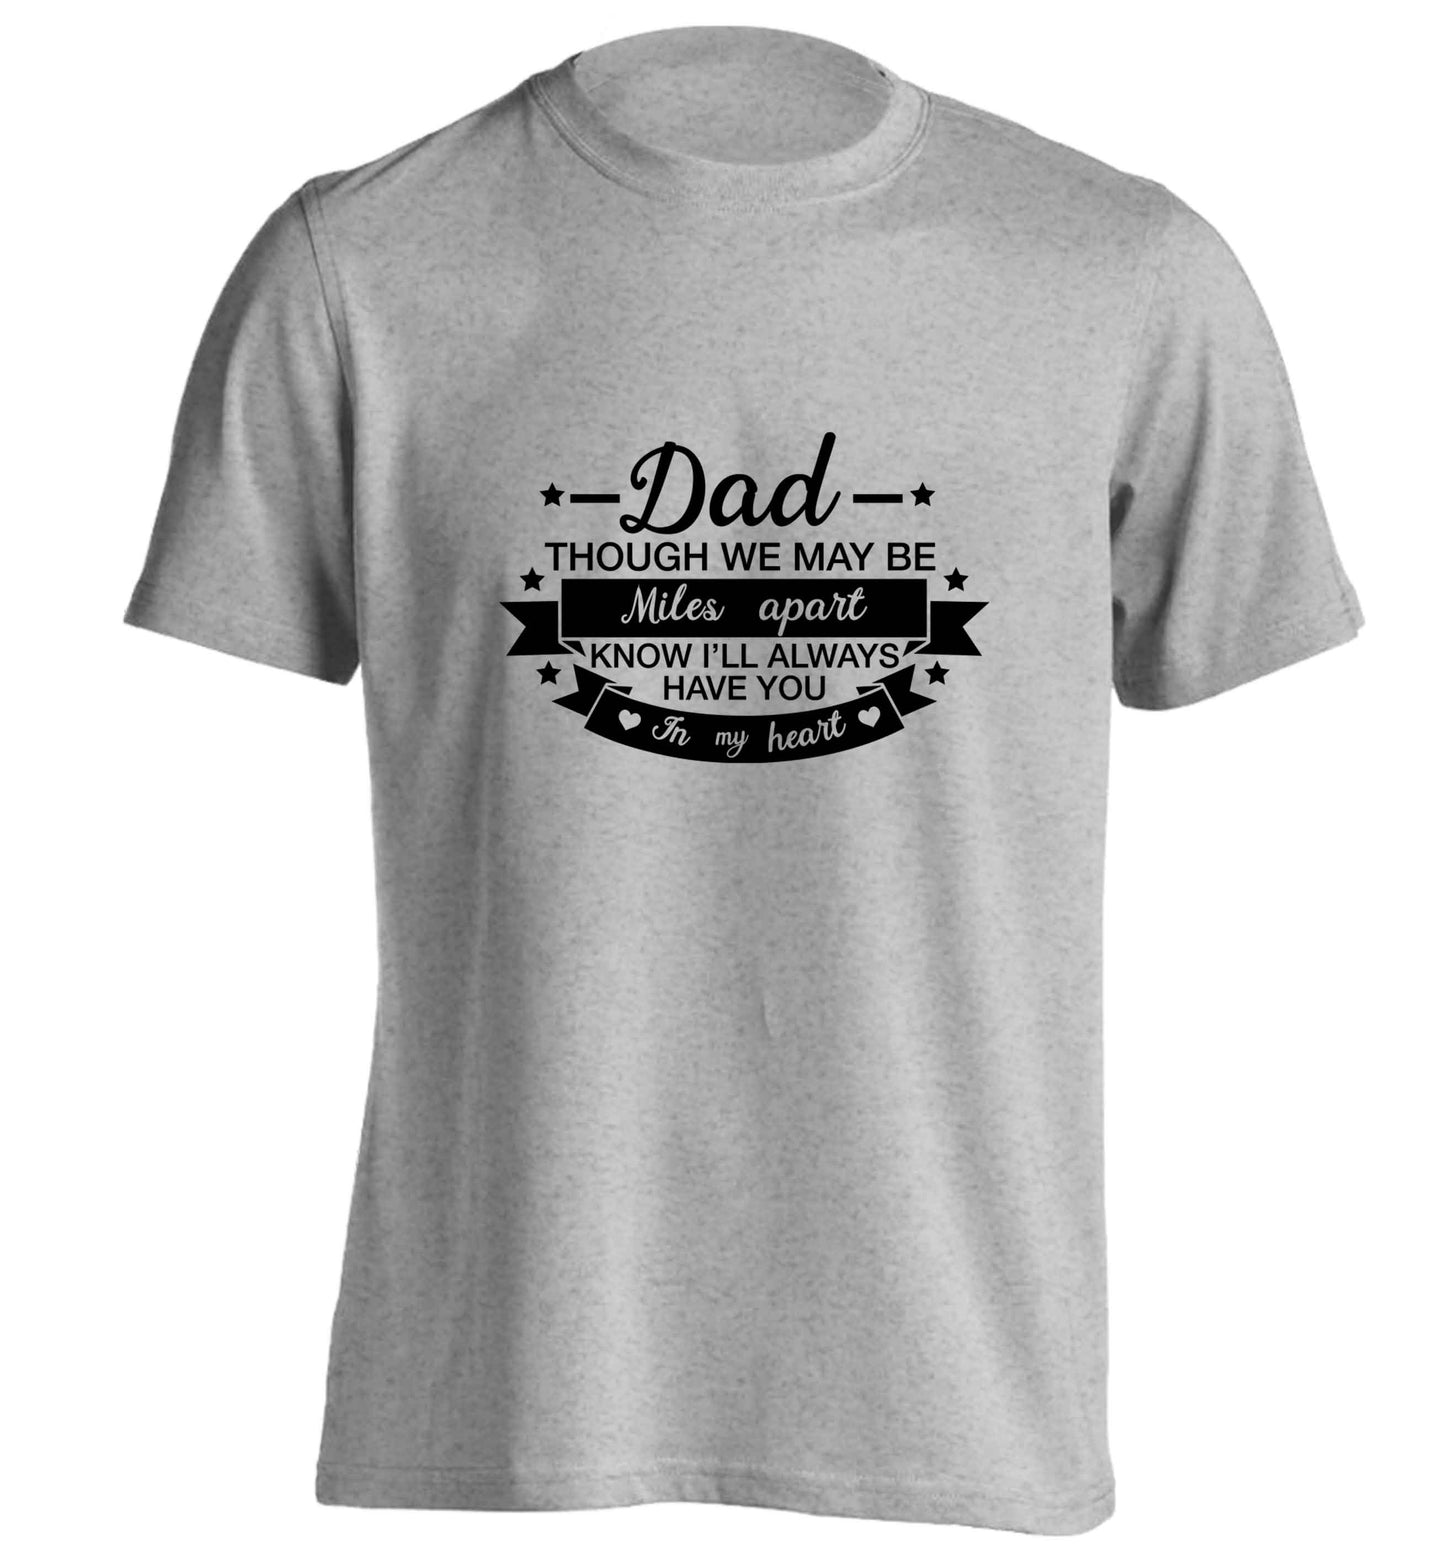 Dad though we are miles apart know I'll always have you in my heart adults unisex grey Tshirt 2XL